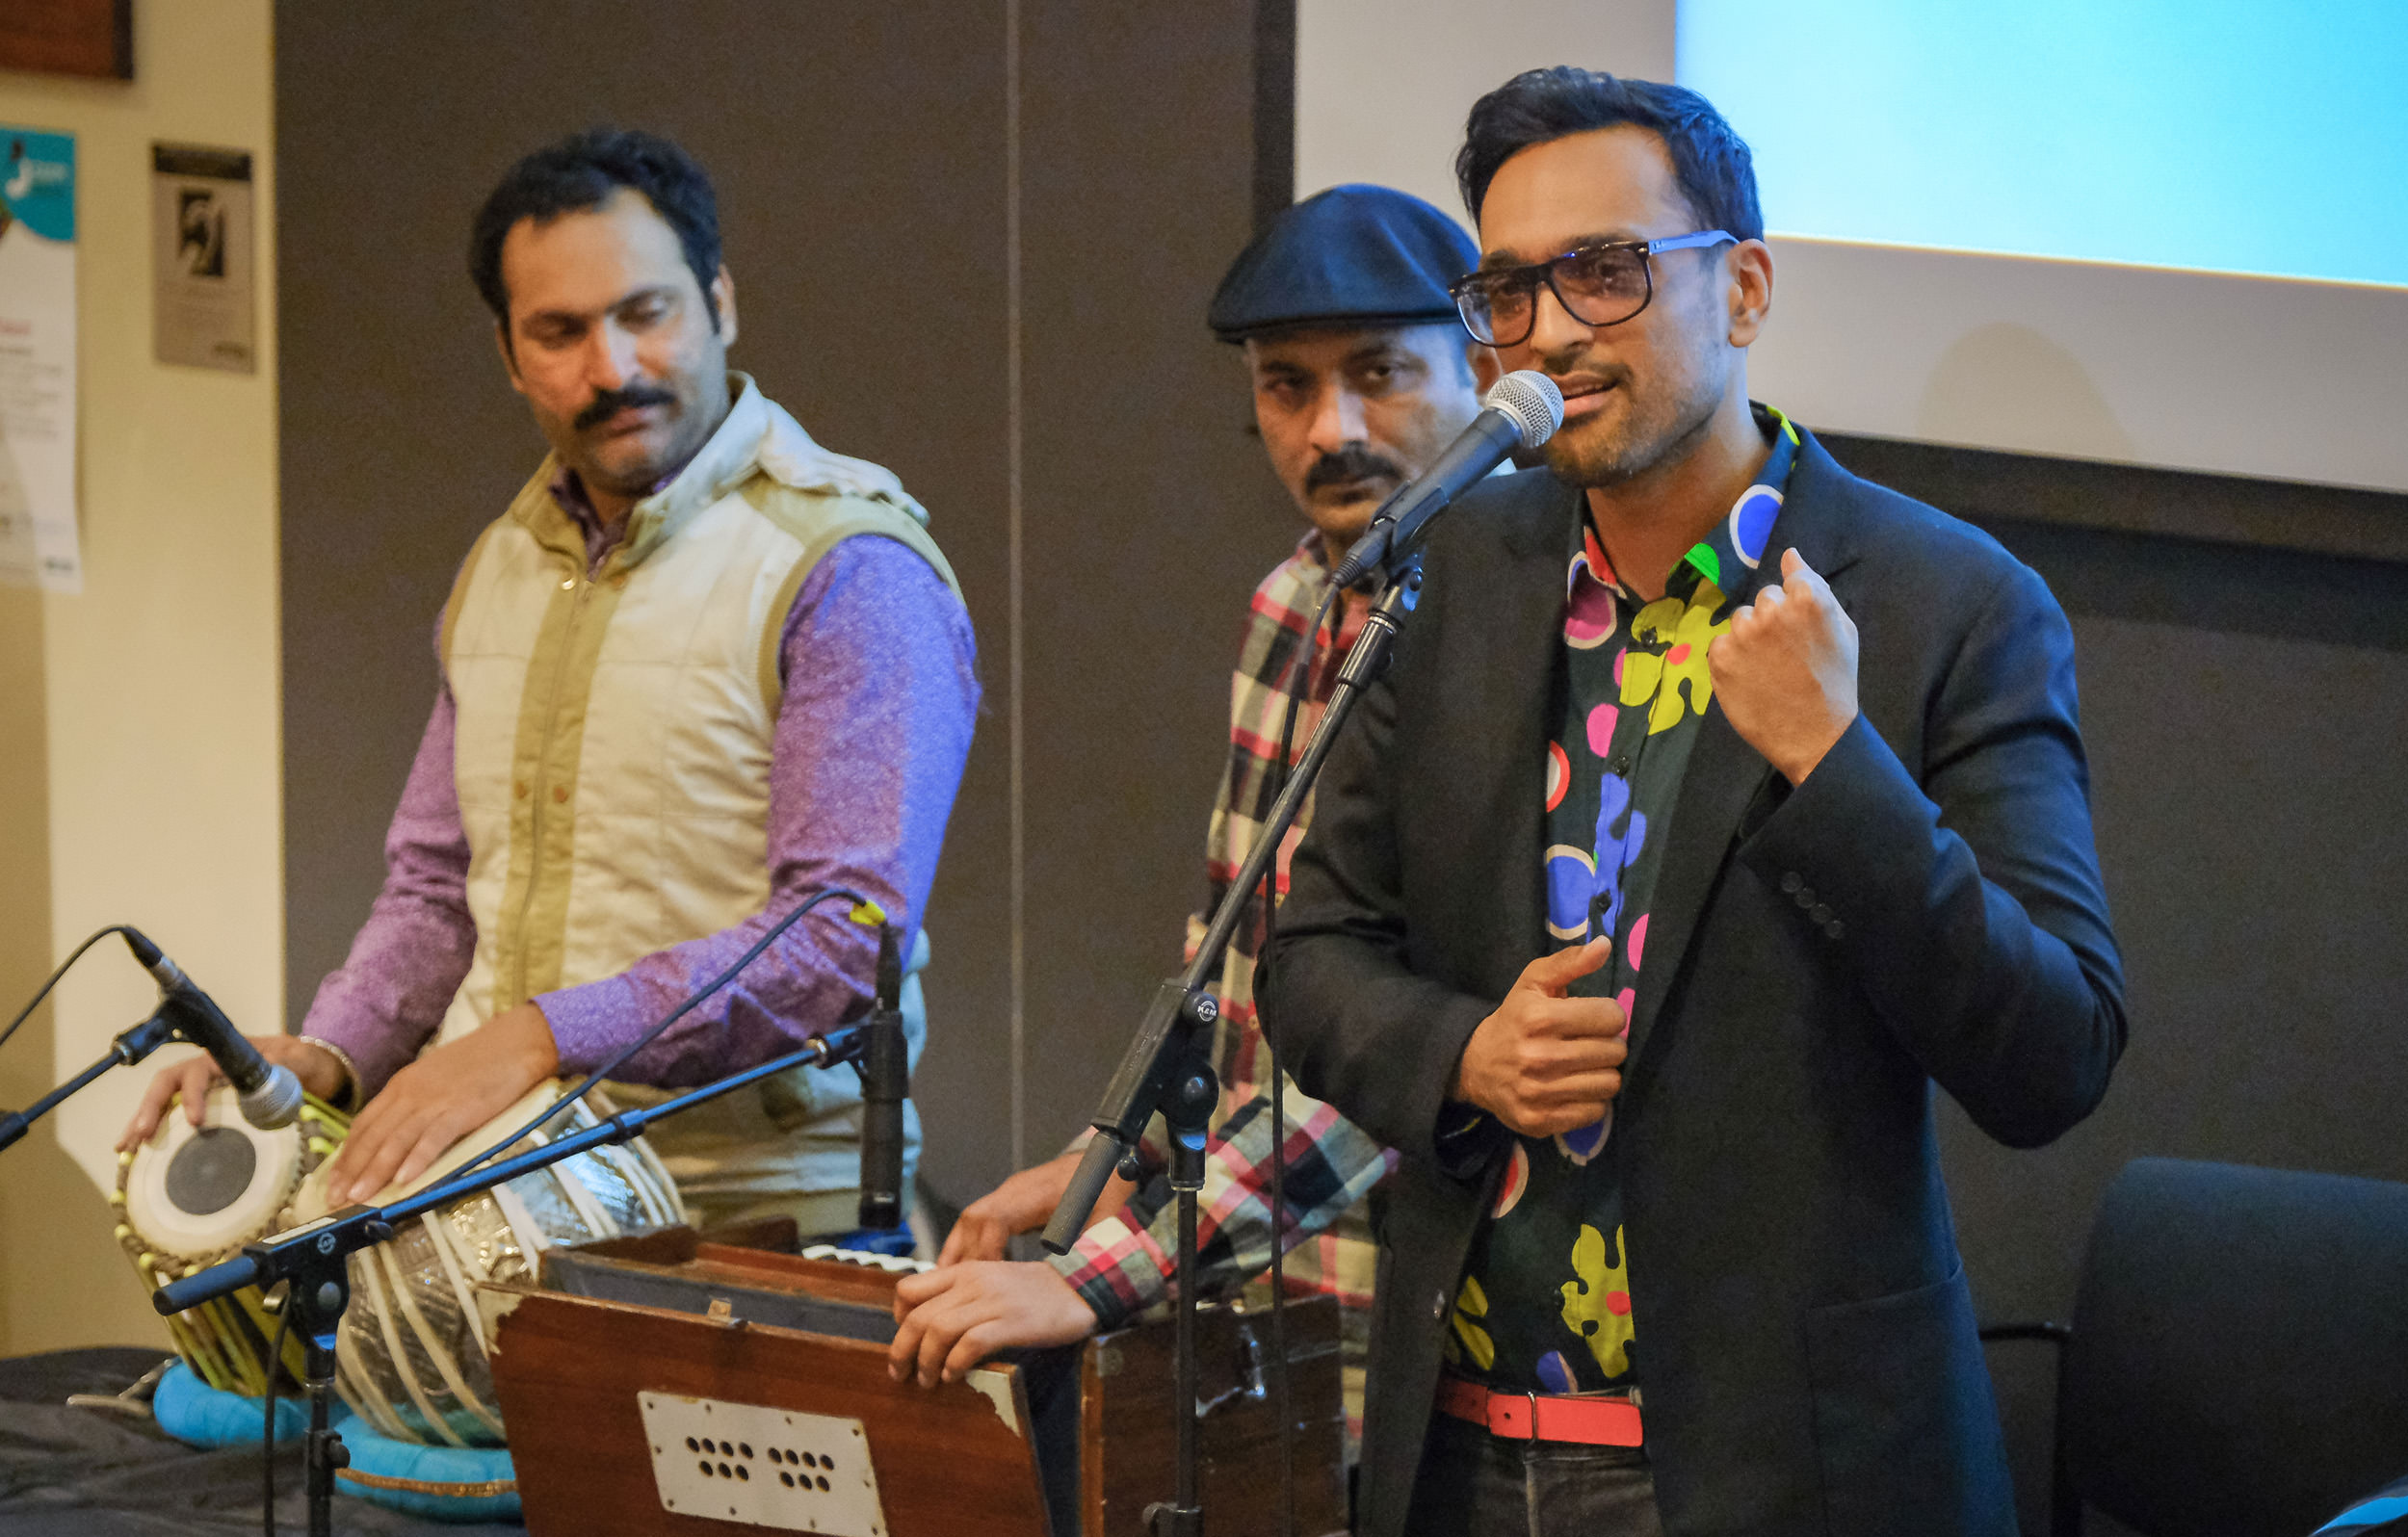 Ali Sethi and his band perform at the "Art of the Ghazal" event.